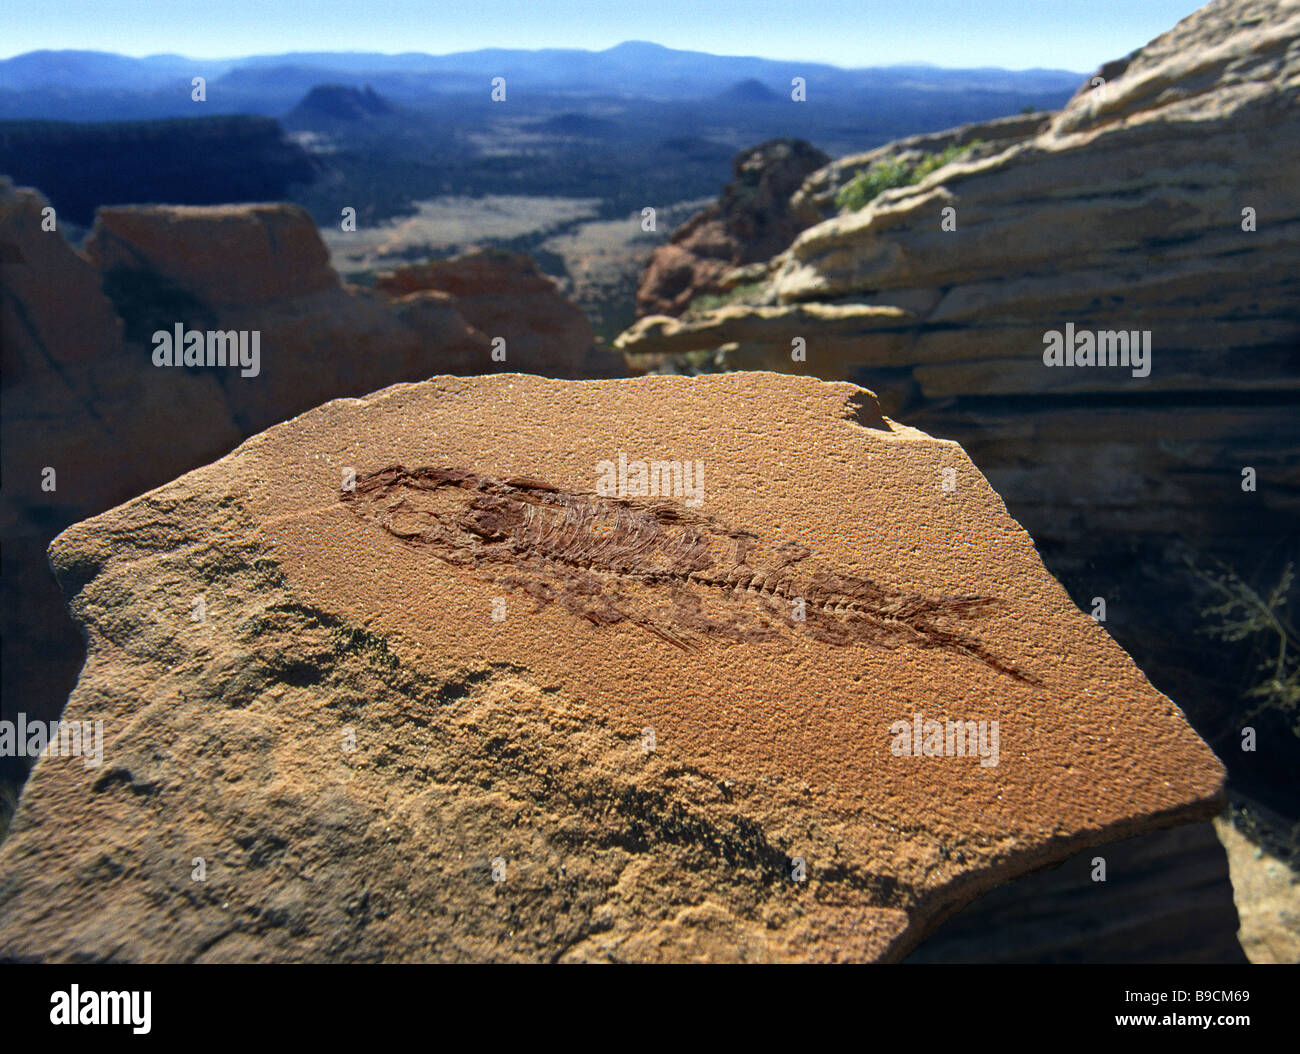 Fossil of a small 4 fish shown in a setting of stratified rock in Arizona Stock Photo